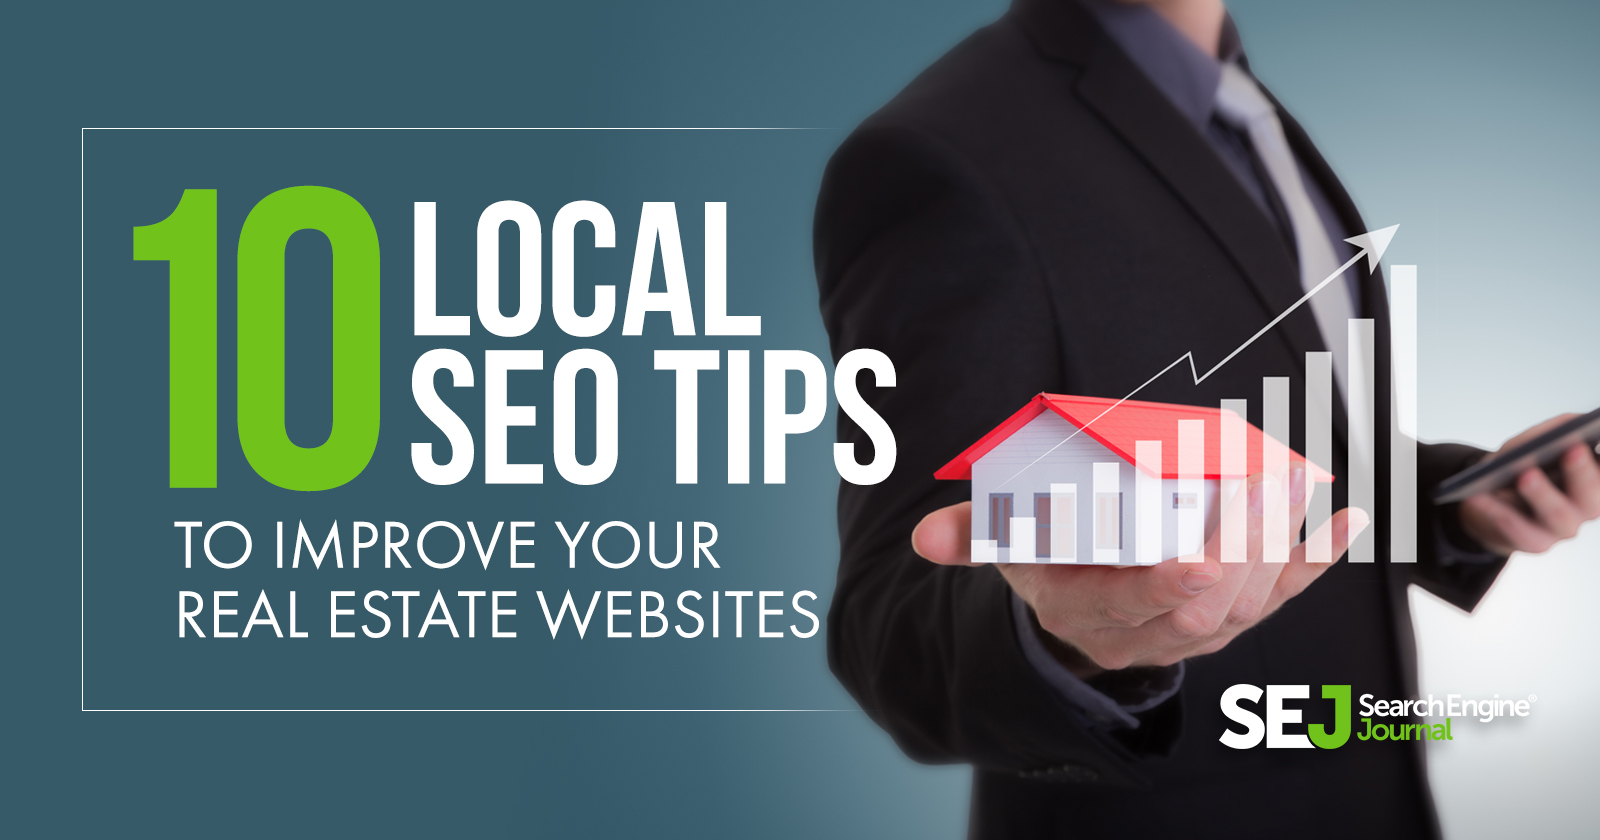 10 Local SEO Tips to Improve Your Real Estate Websites post thumbnail